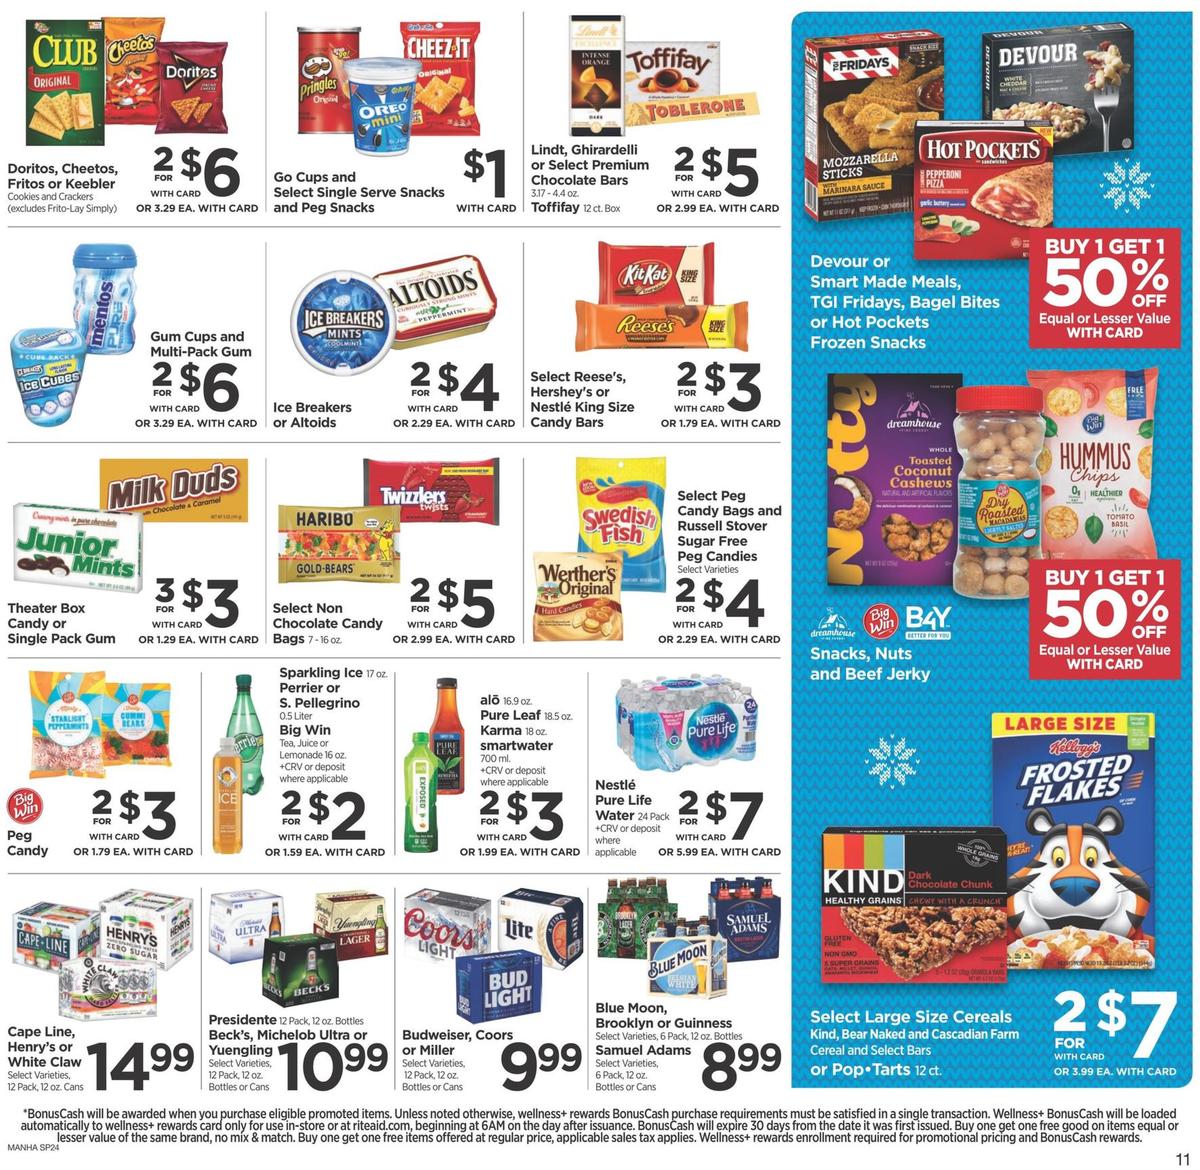 Rite Aid Weekly Ad from December 1